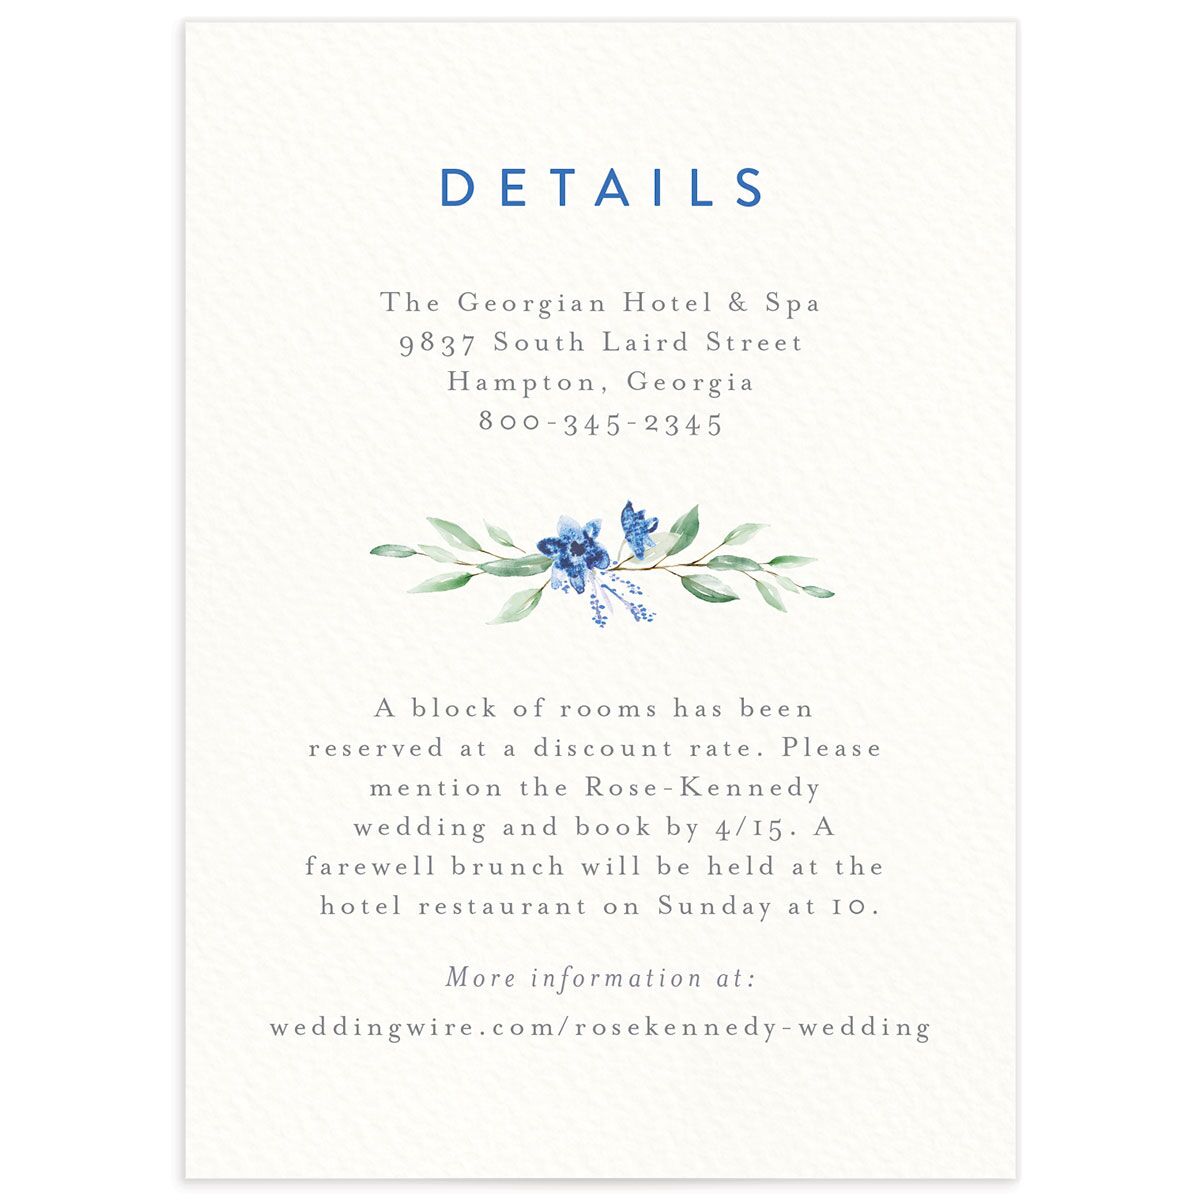 Rustic Emblem Wedding Enclosure Cards front in French Blue